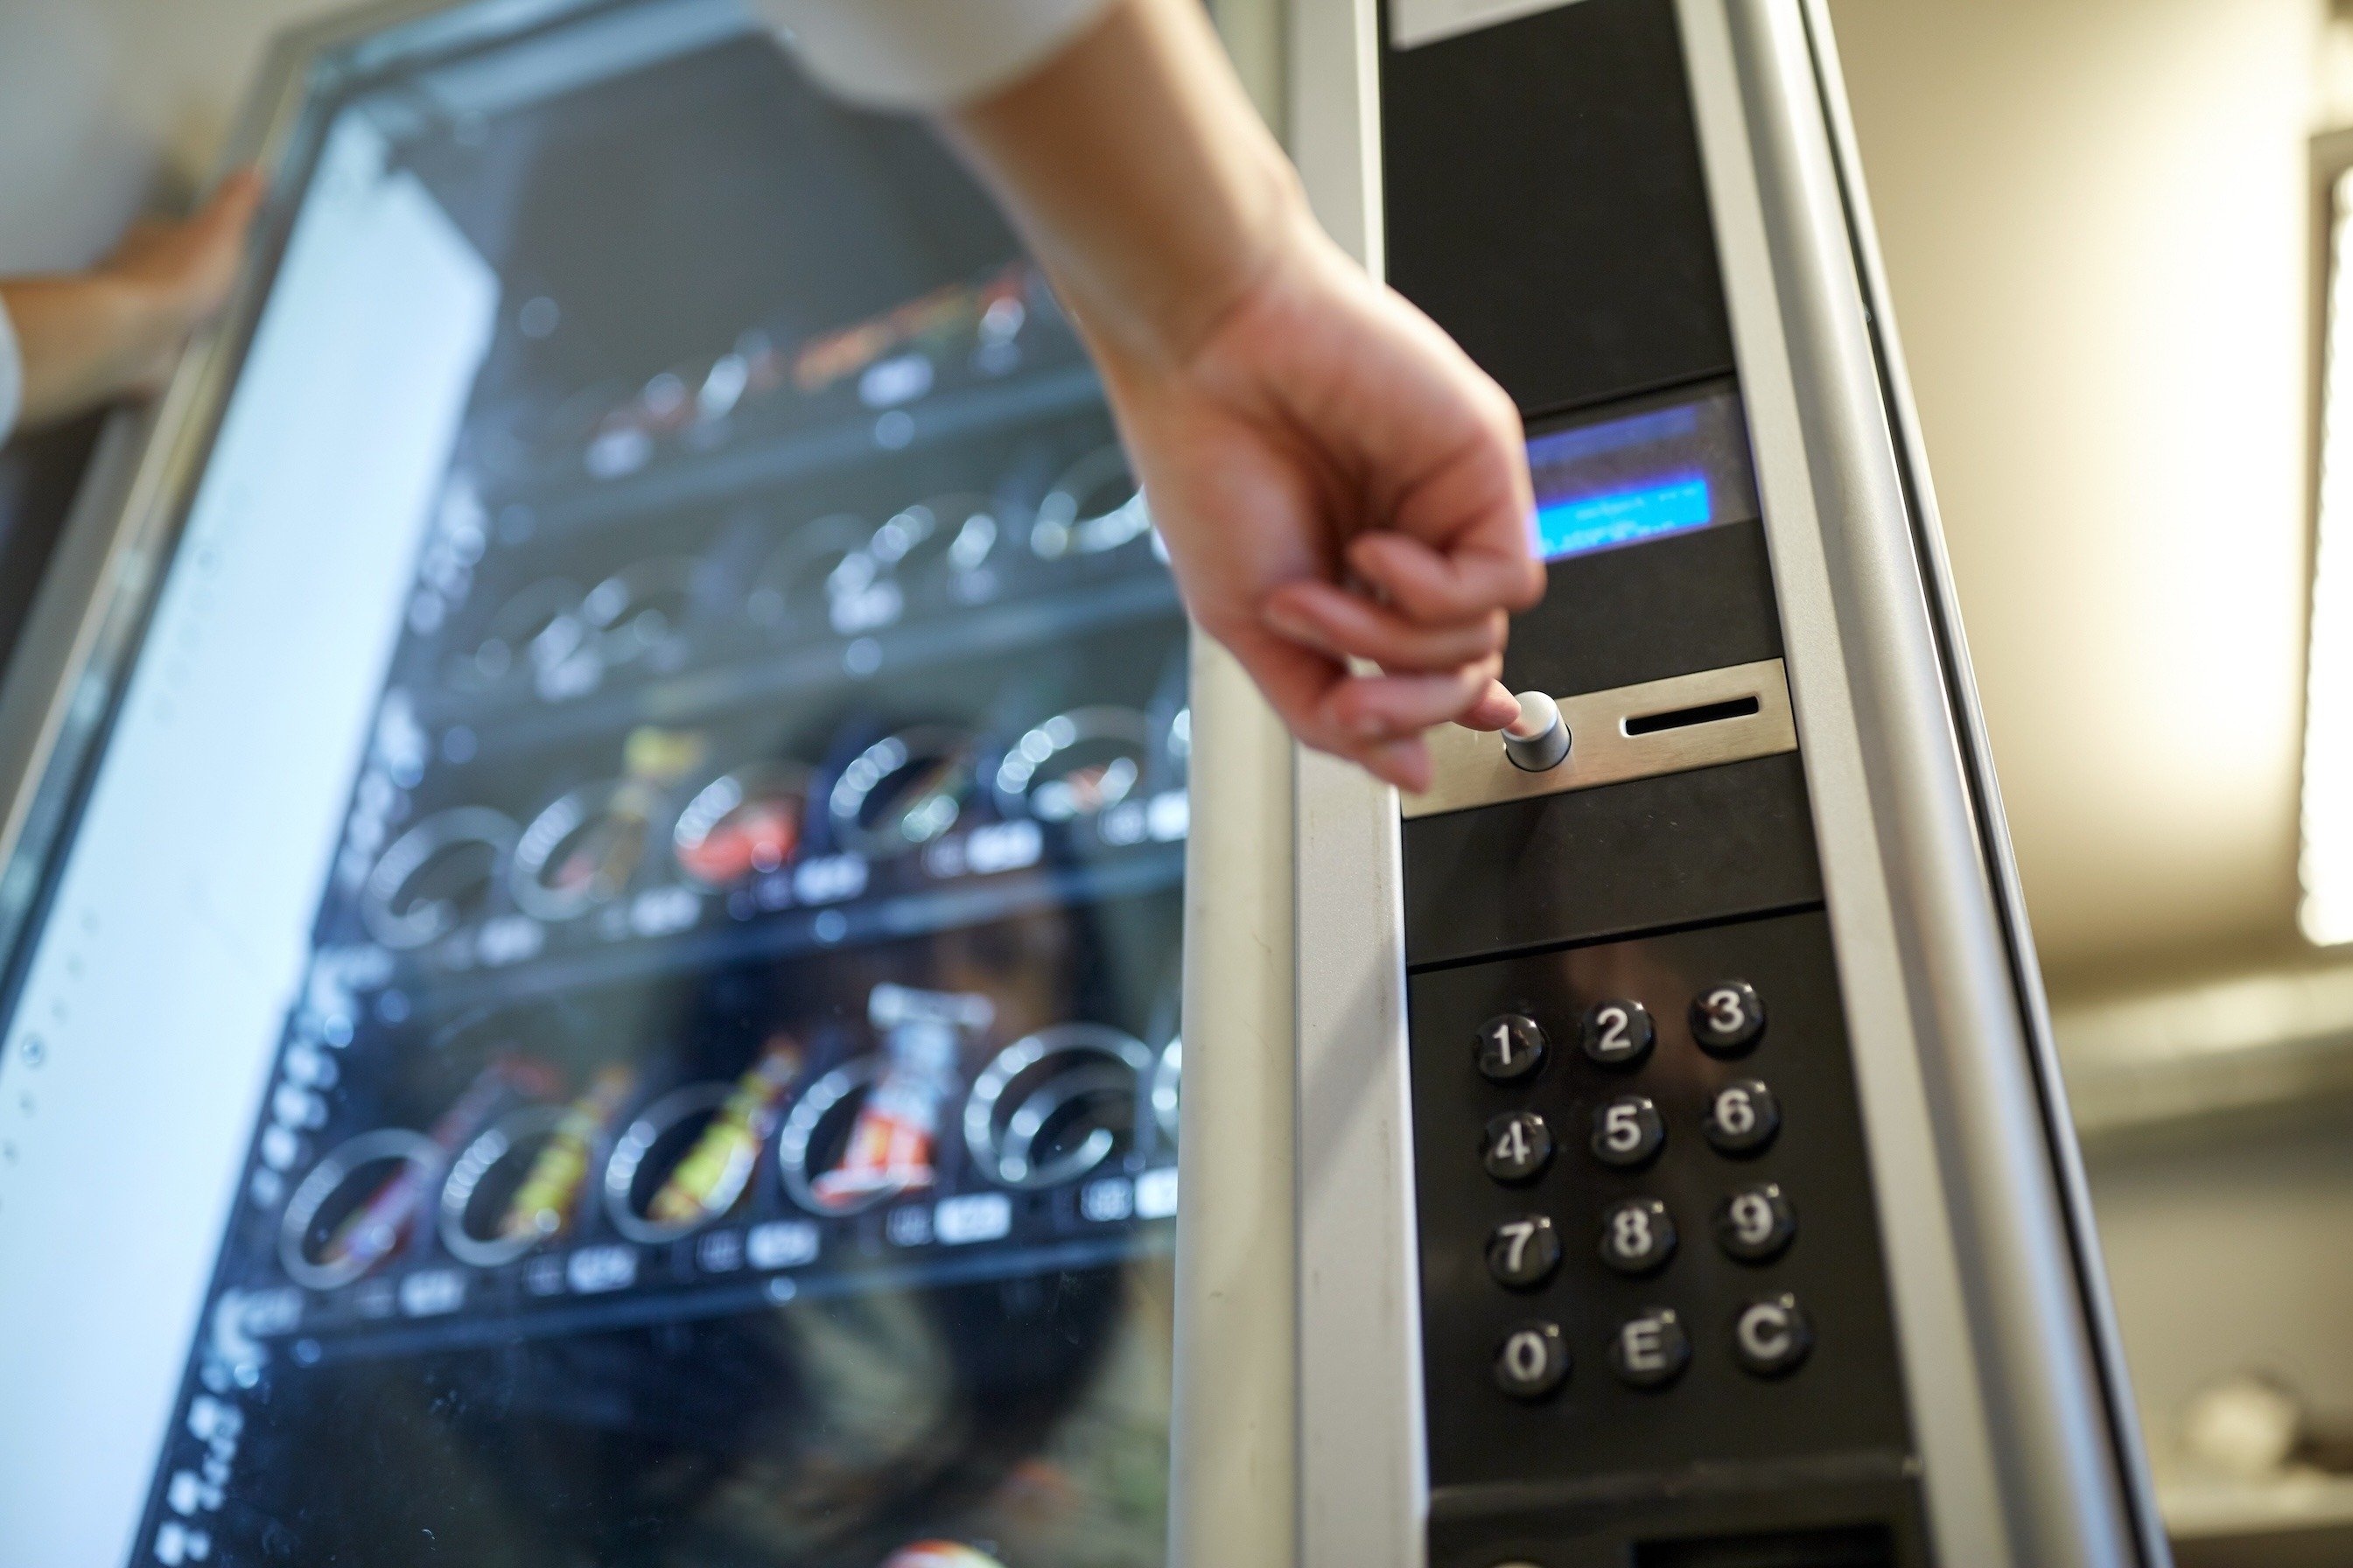 A Buyer’s Guide For Choosing Healthy Vending Machines